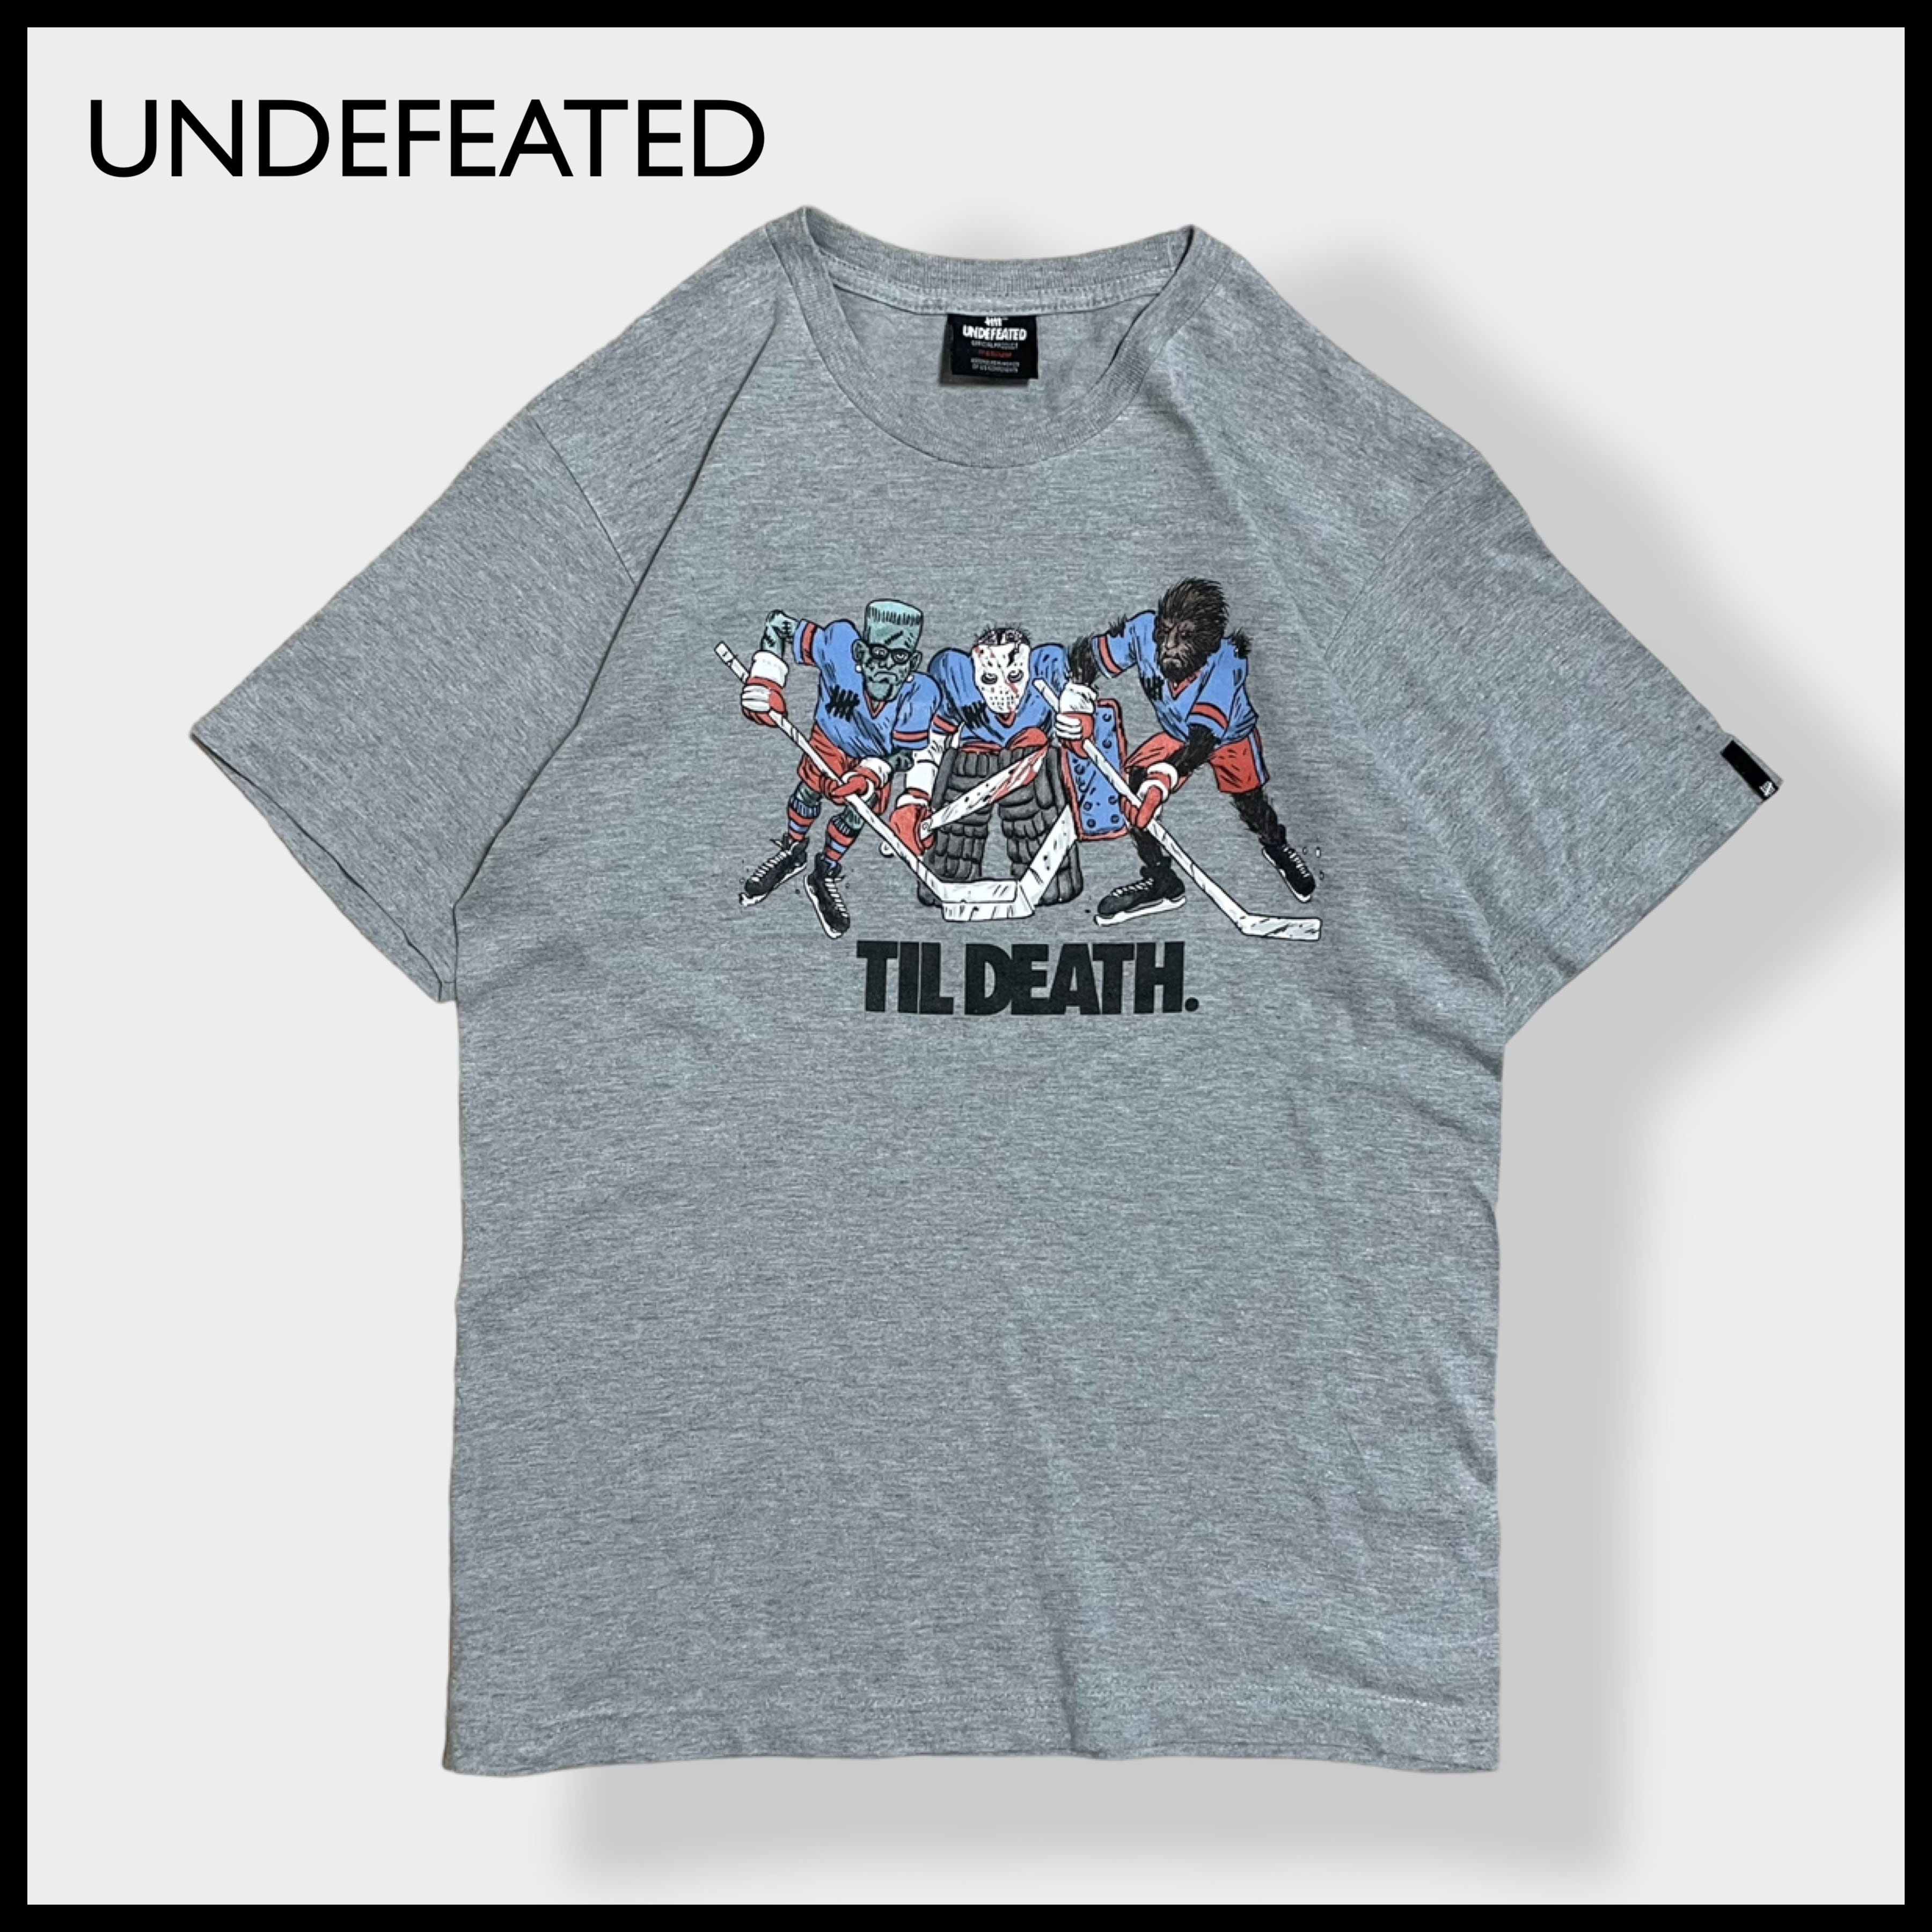 UNDEFEATEDメキシコ製 プリント TIL DEATH ロゴ Tシャツ イラスト